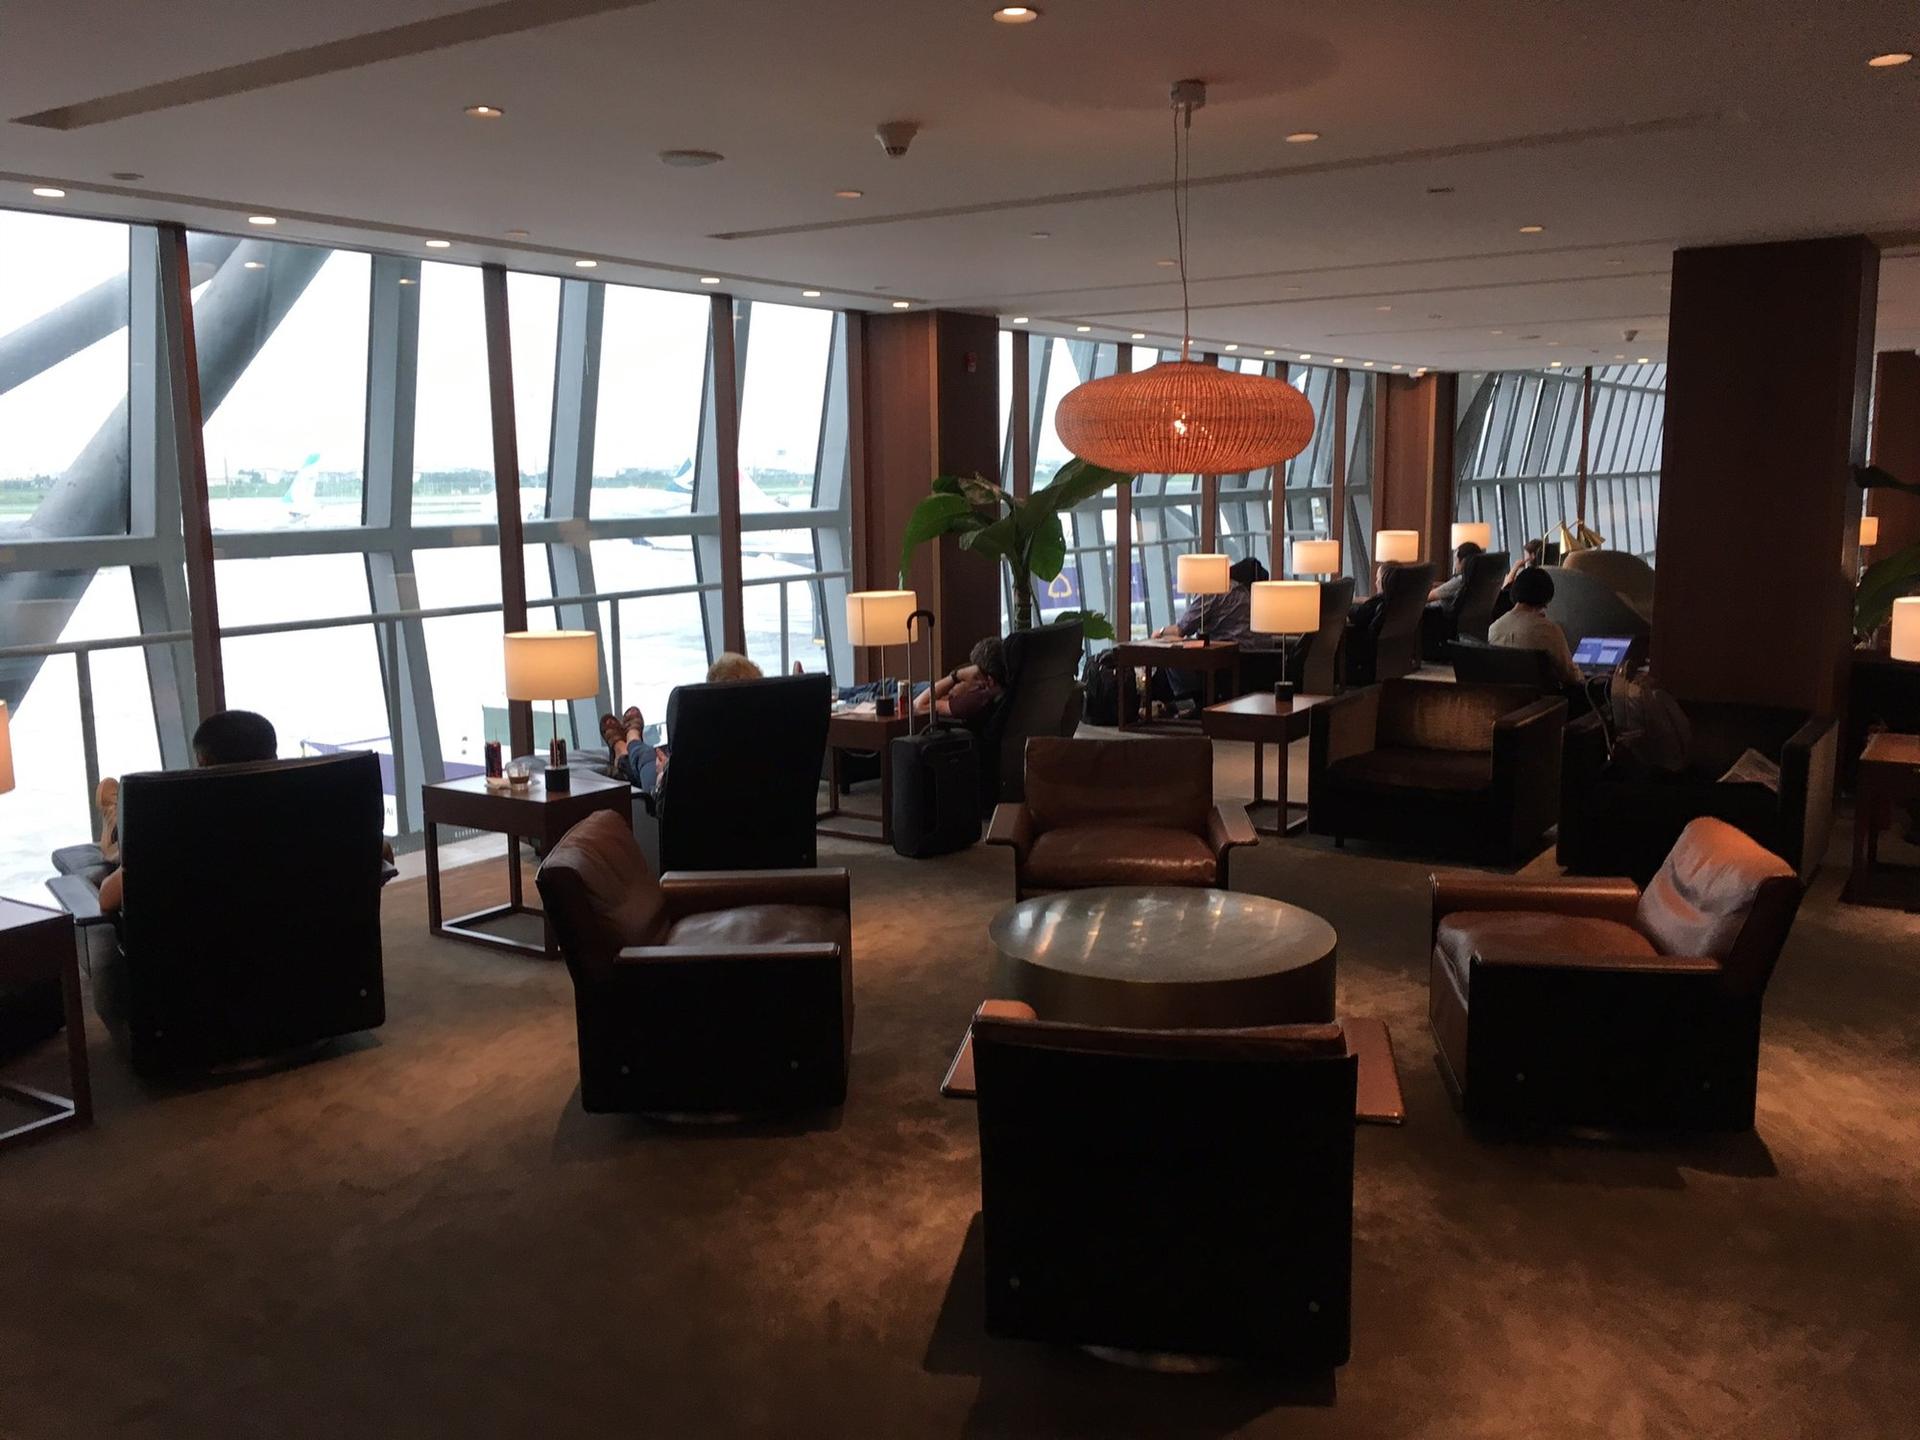 Cathay Pacific First and Business Class Lounge image 56 of 69